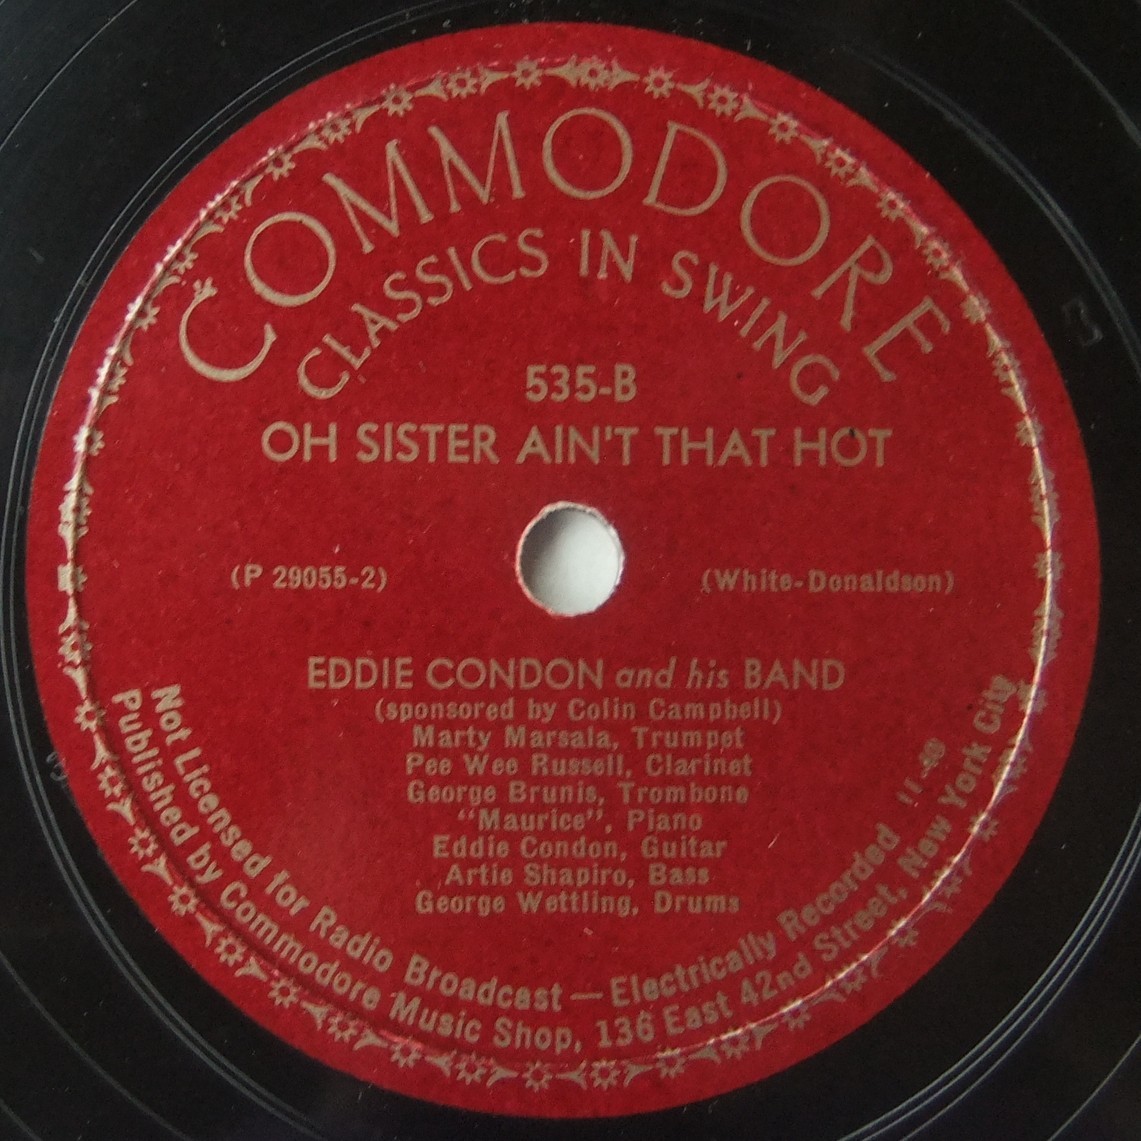 ◆ EDDIE CONDON ◆ ( You ’ re Some ) Pretty Doll / Oh Sister Ain ’ t That Hot ◆ Commodore 535 (78rpm SP) ◆_画像2